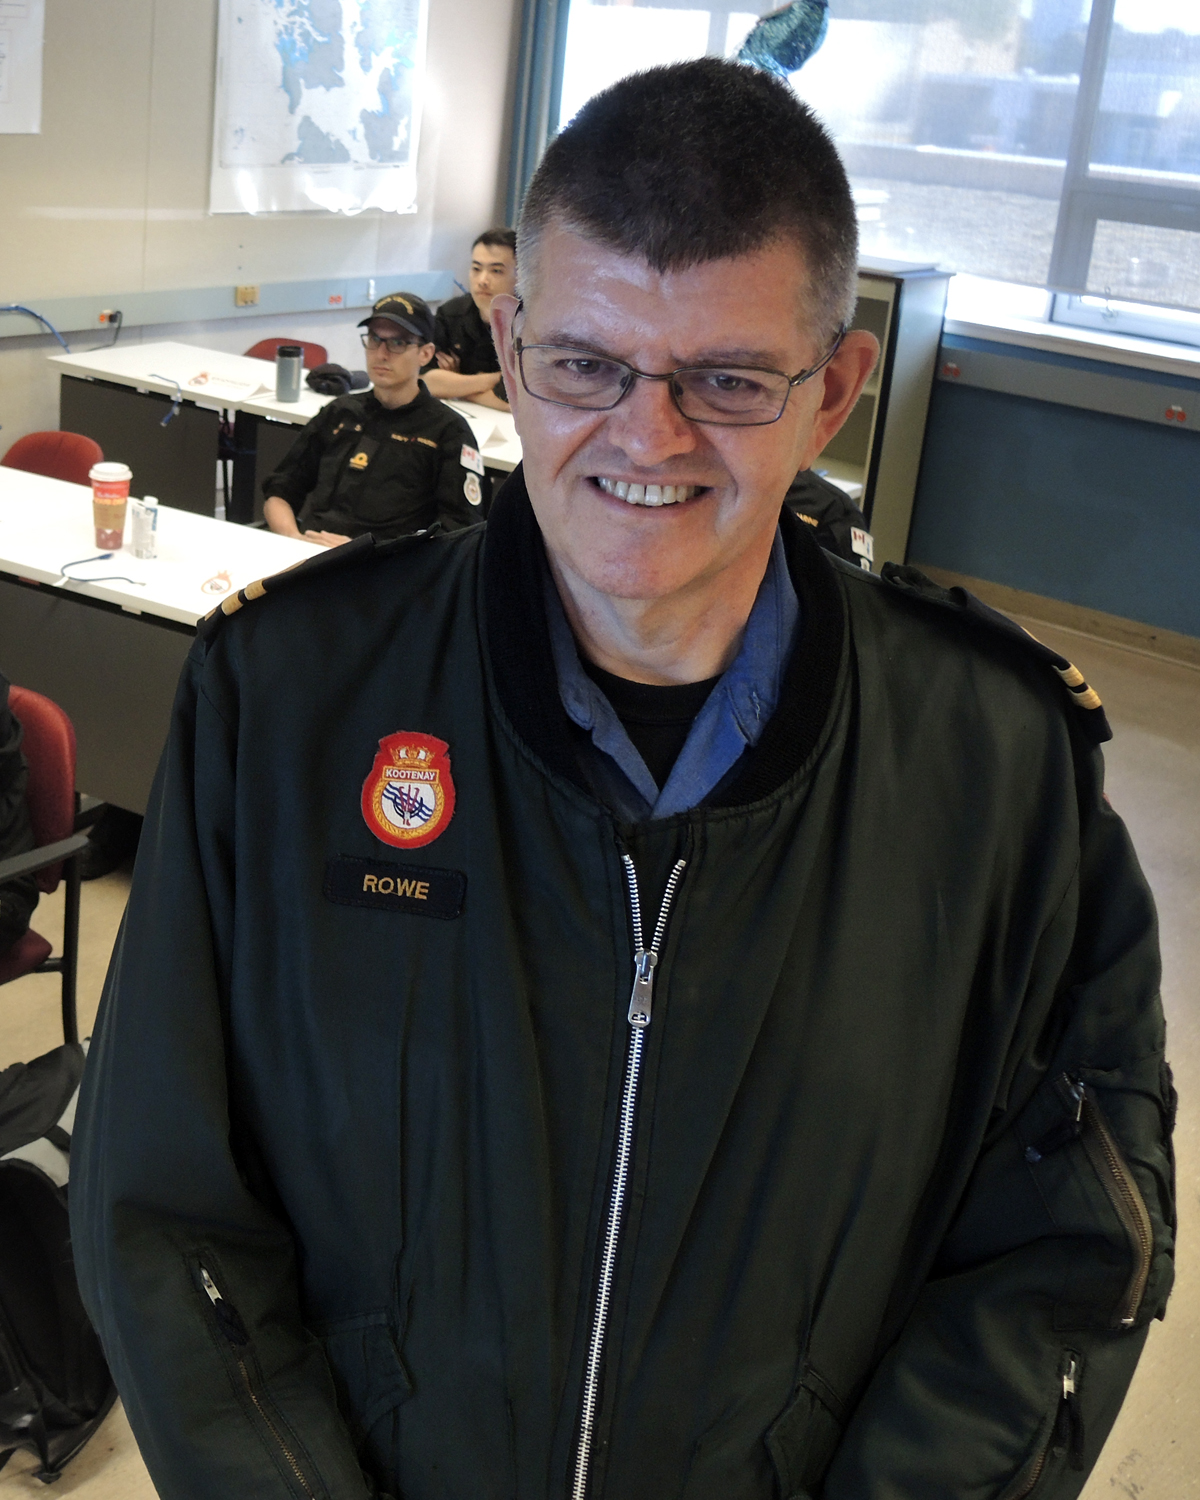 HMCS Venture Instructor Lt(N) Richard Rowe proudly shows off his Bridge Watchkeepers Jacket during his NWO III Kootenay class at Workpoint, July 8. Photo: Peter Mallett/Lookout Newspaper